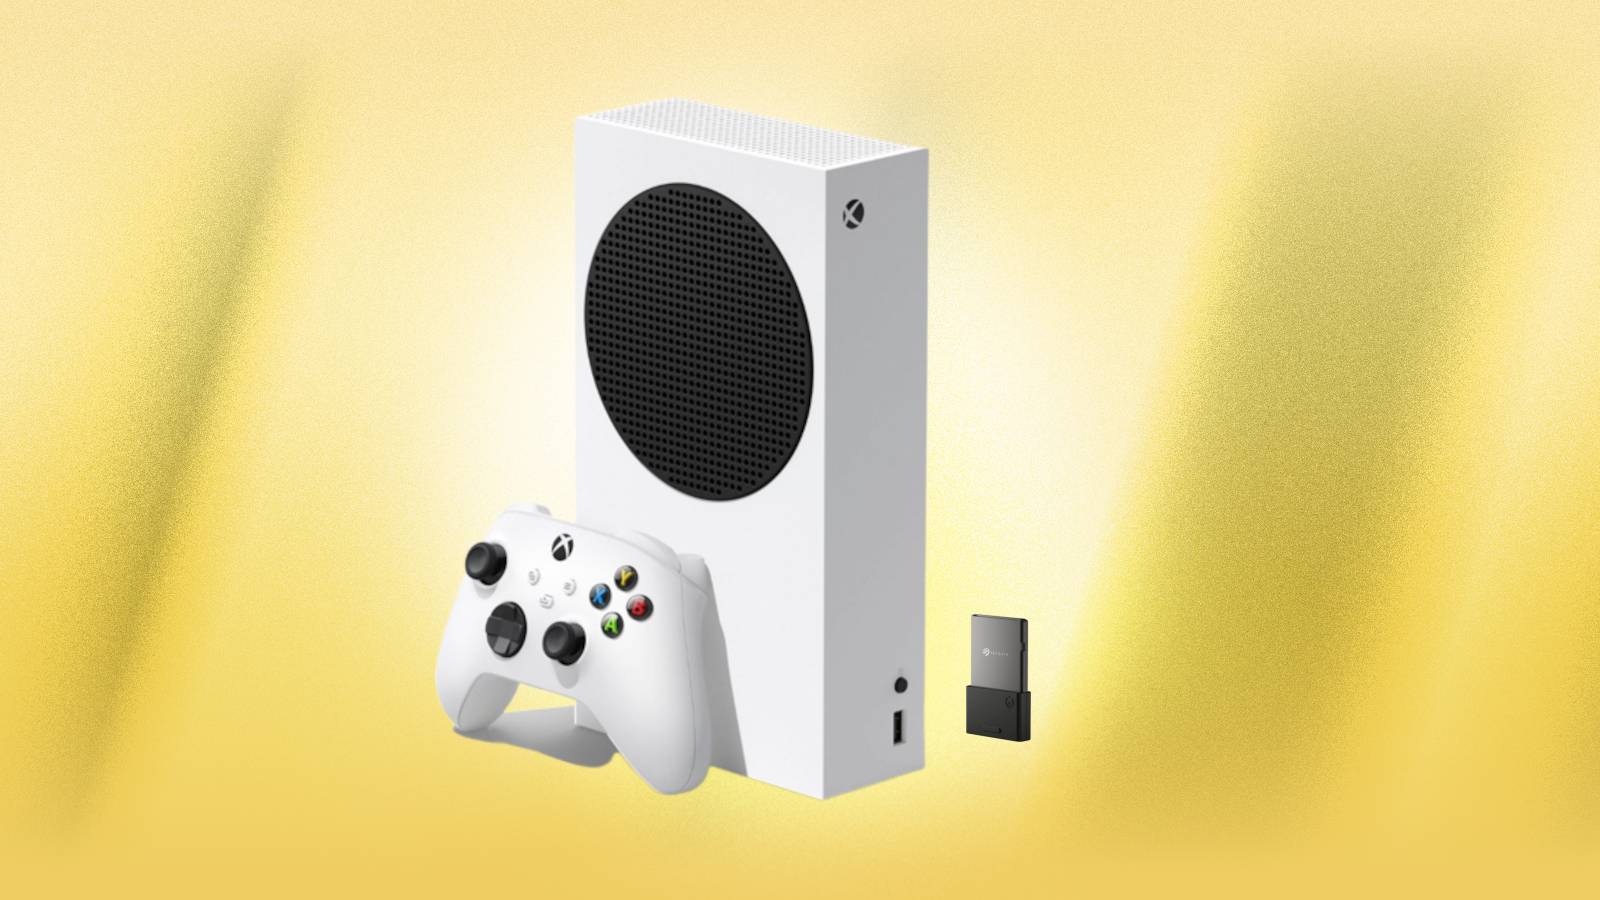 The best Xbox One S deal of 2019: Just $185 - CNET